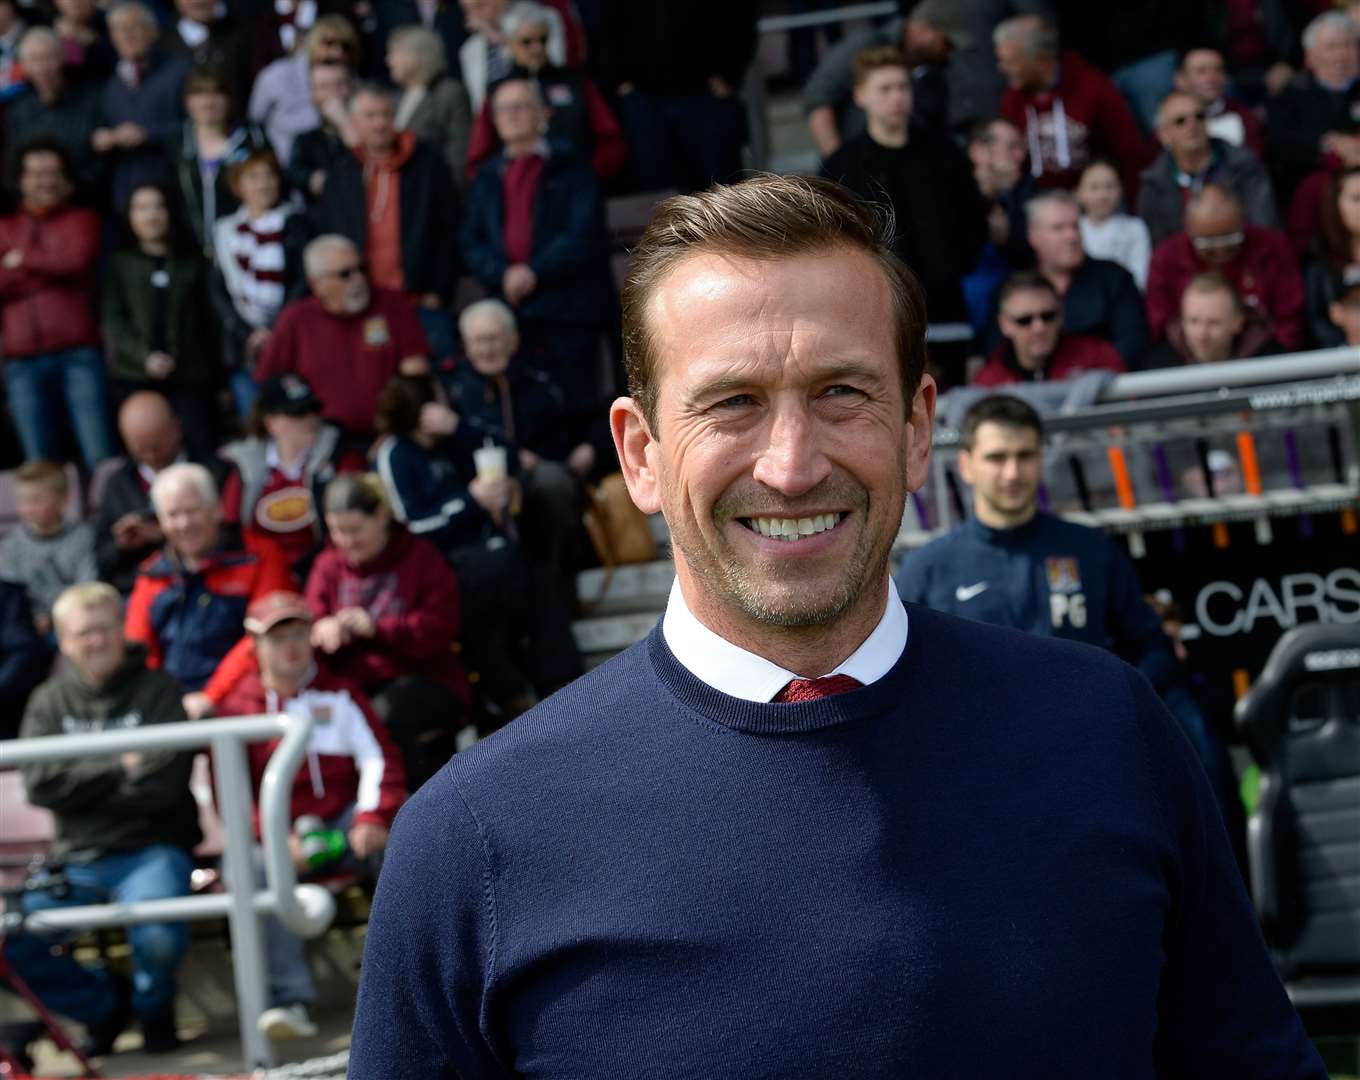 Former Gills manager Justin Edinburgh enjoyed a great first half of the 2015/16 season, sitting top of the table for a while